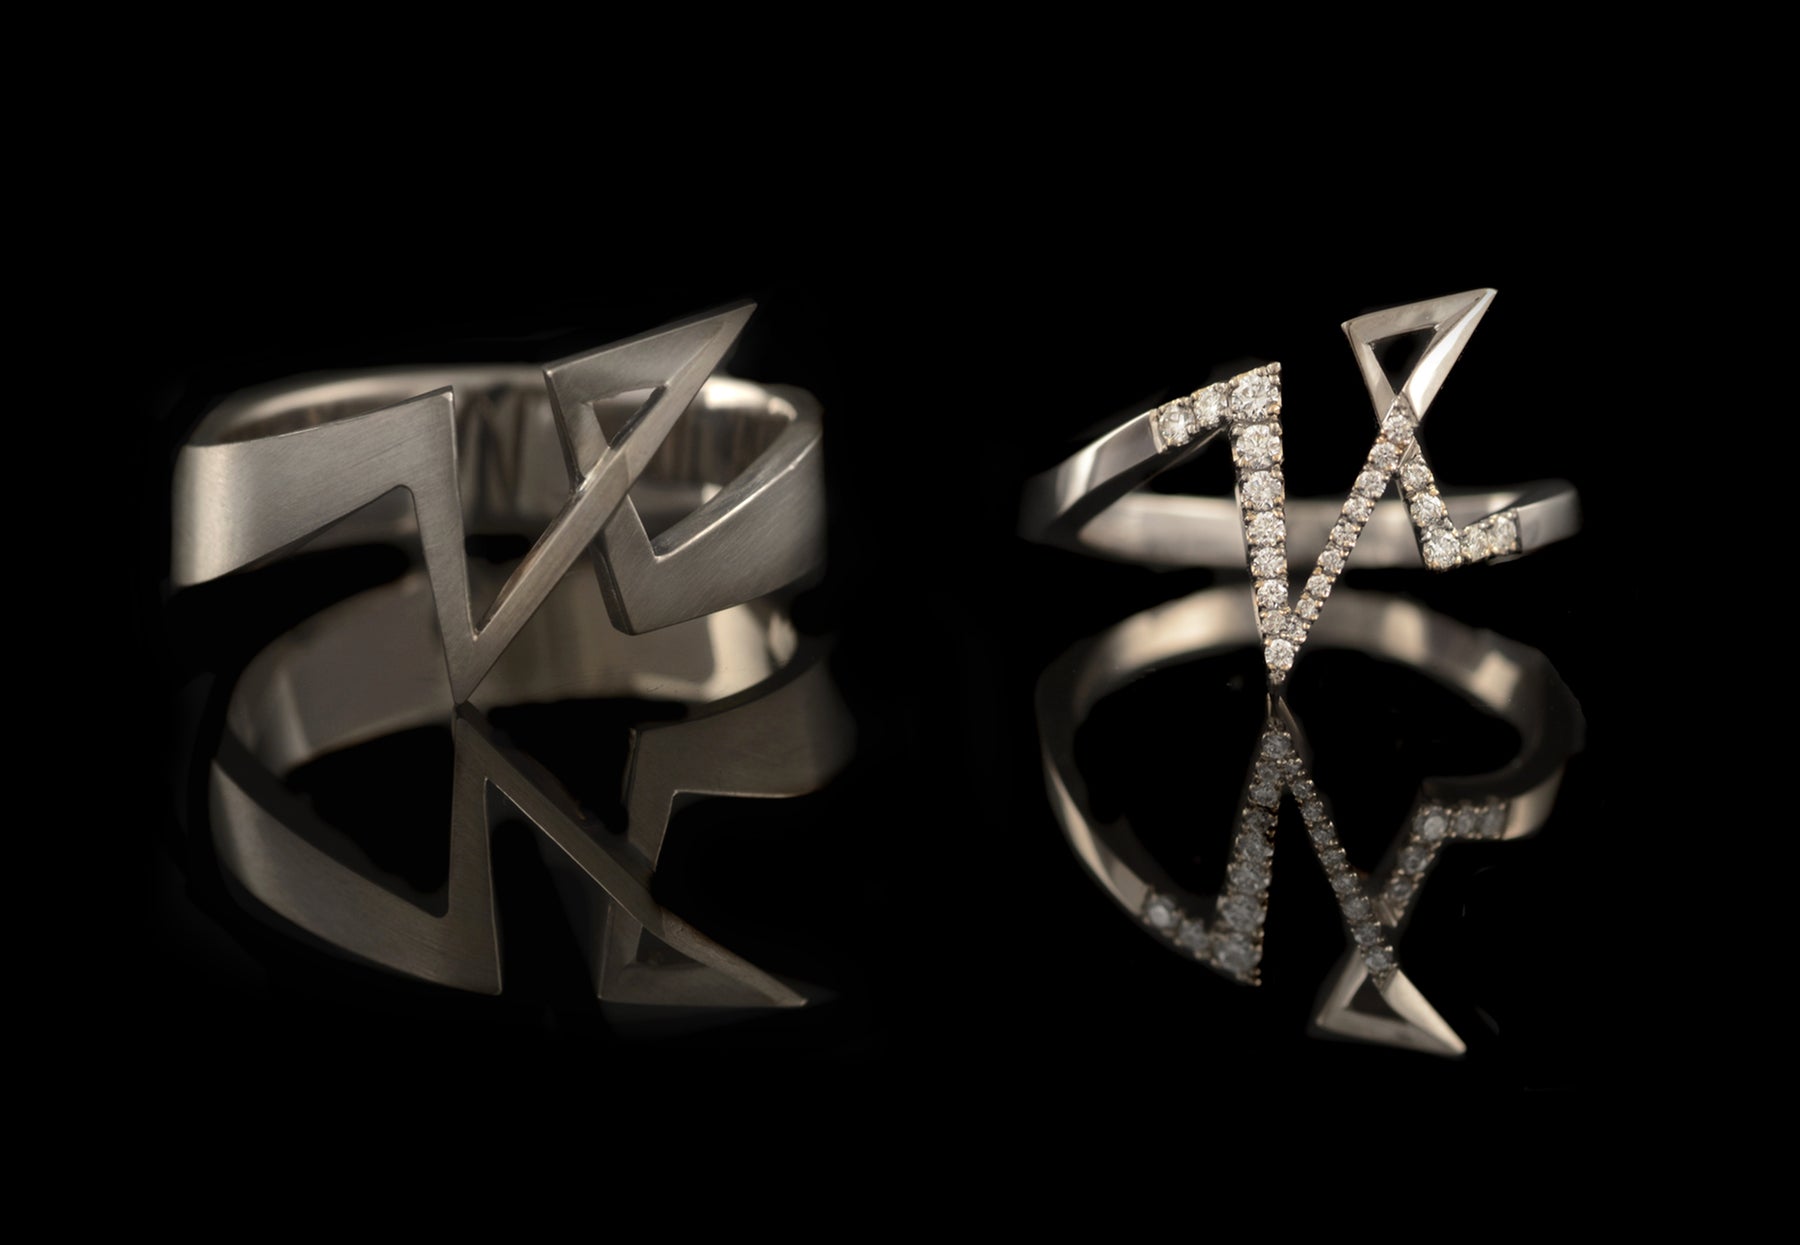 His and hers 'Spark' wedding rings 